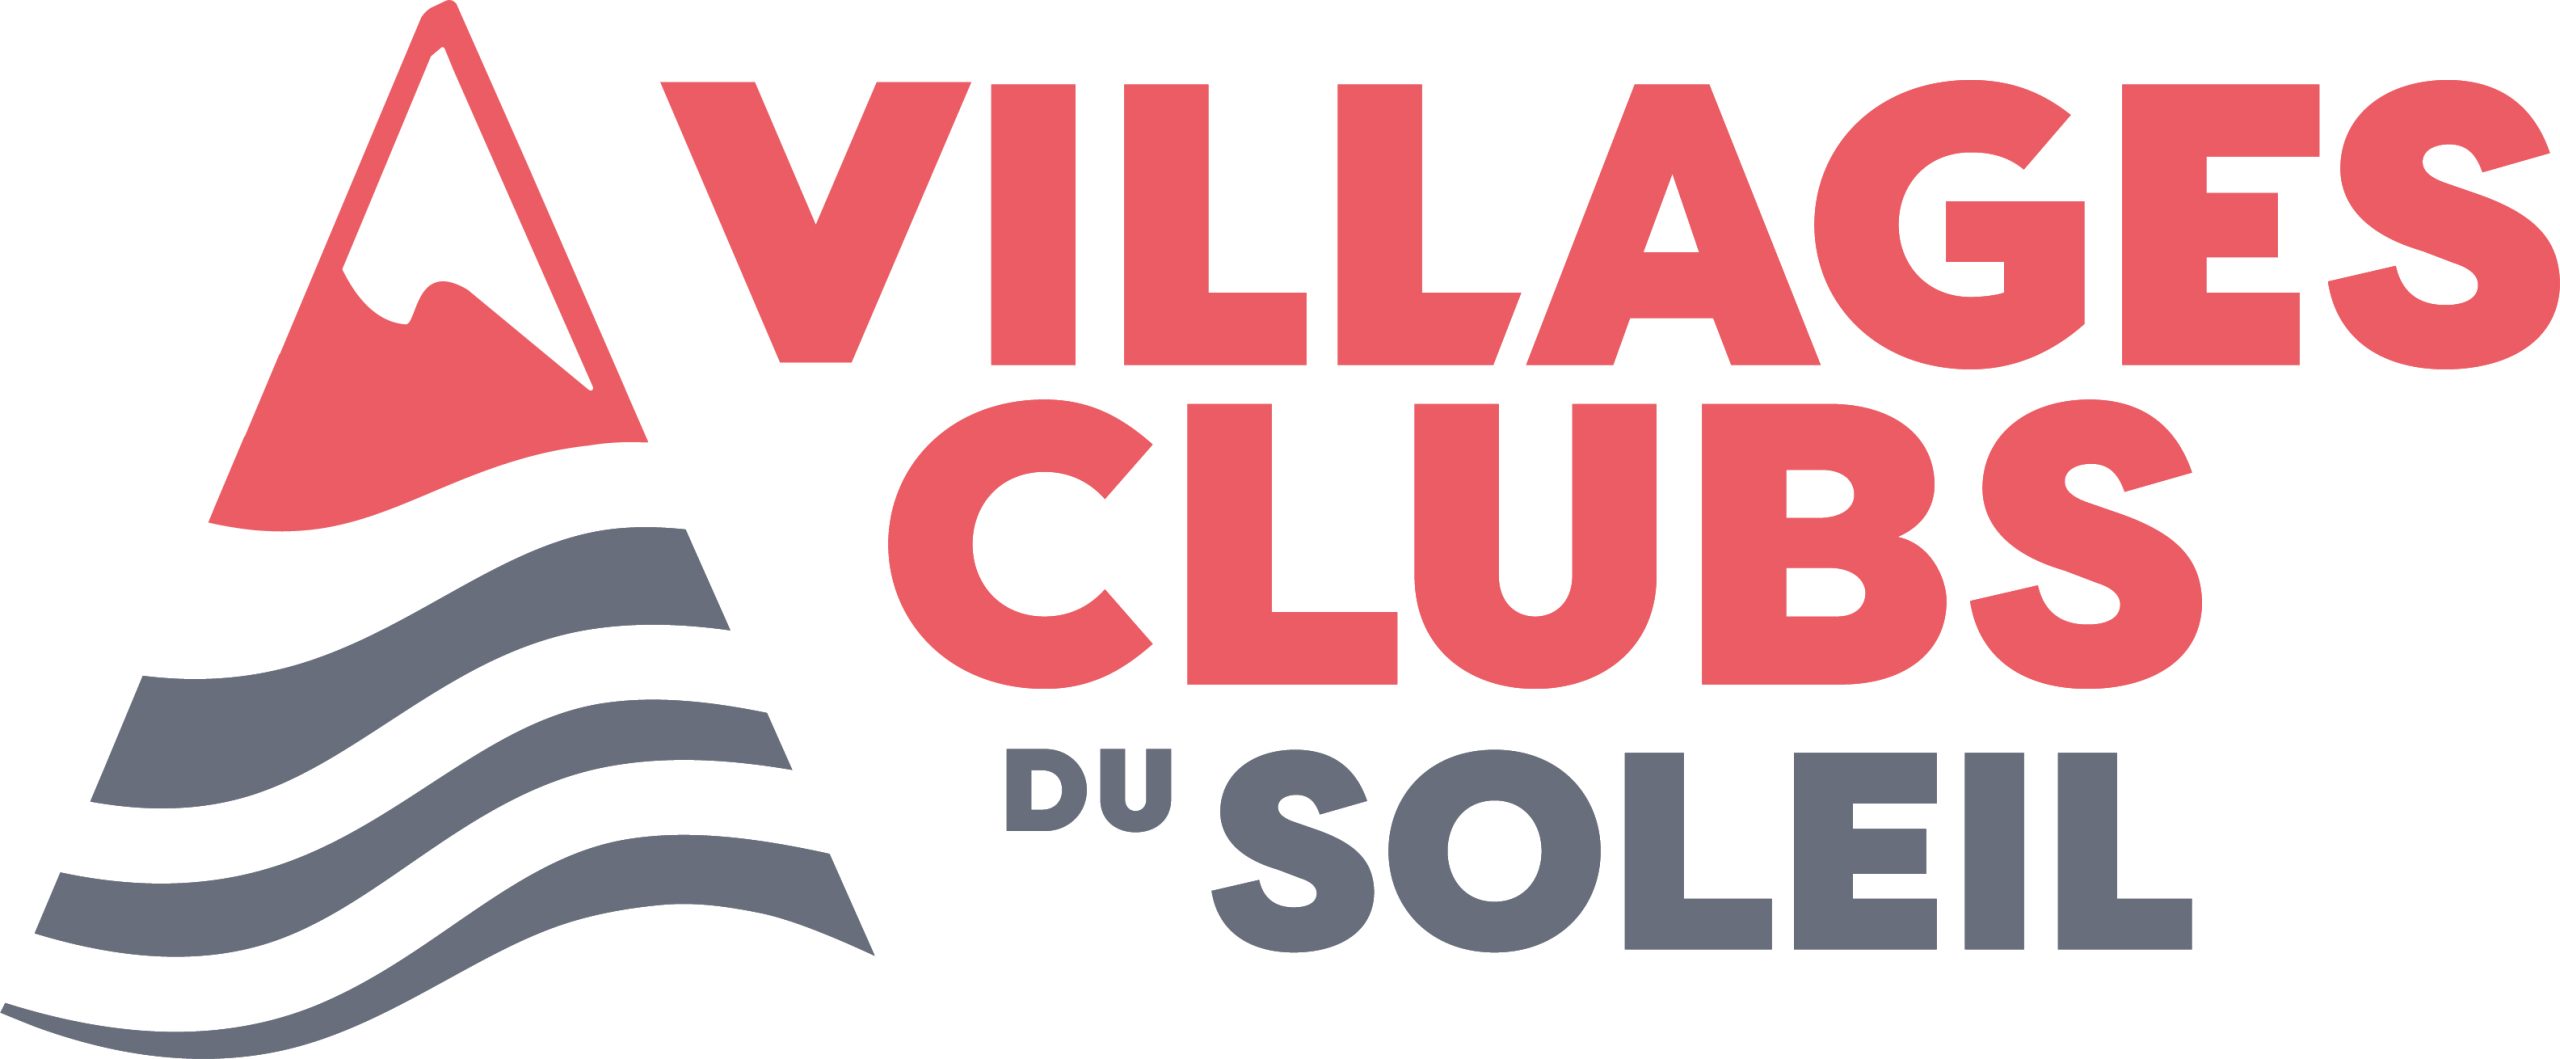 You are currently viewing Villages Clubs du Soleil